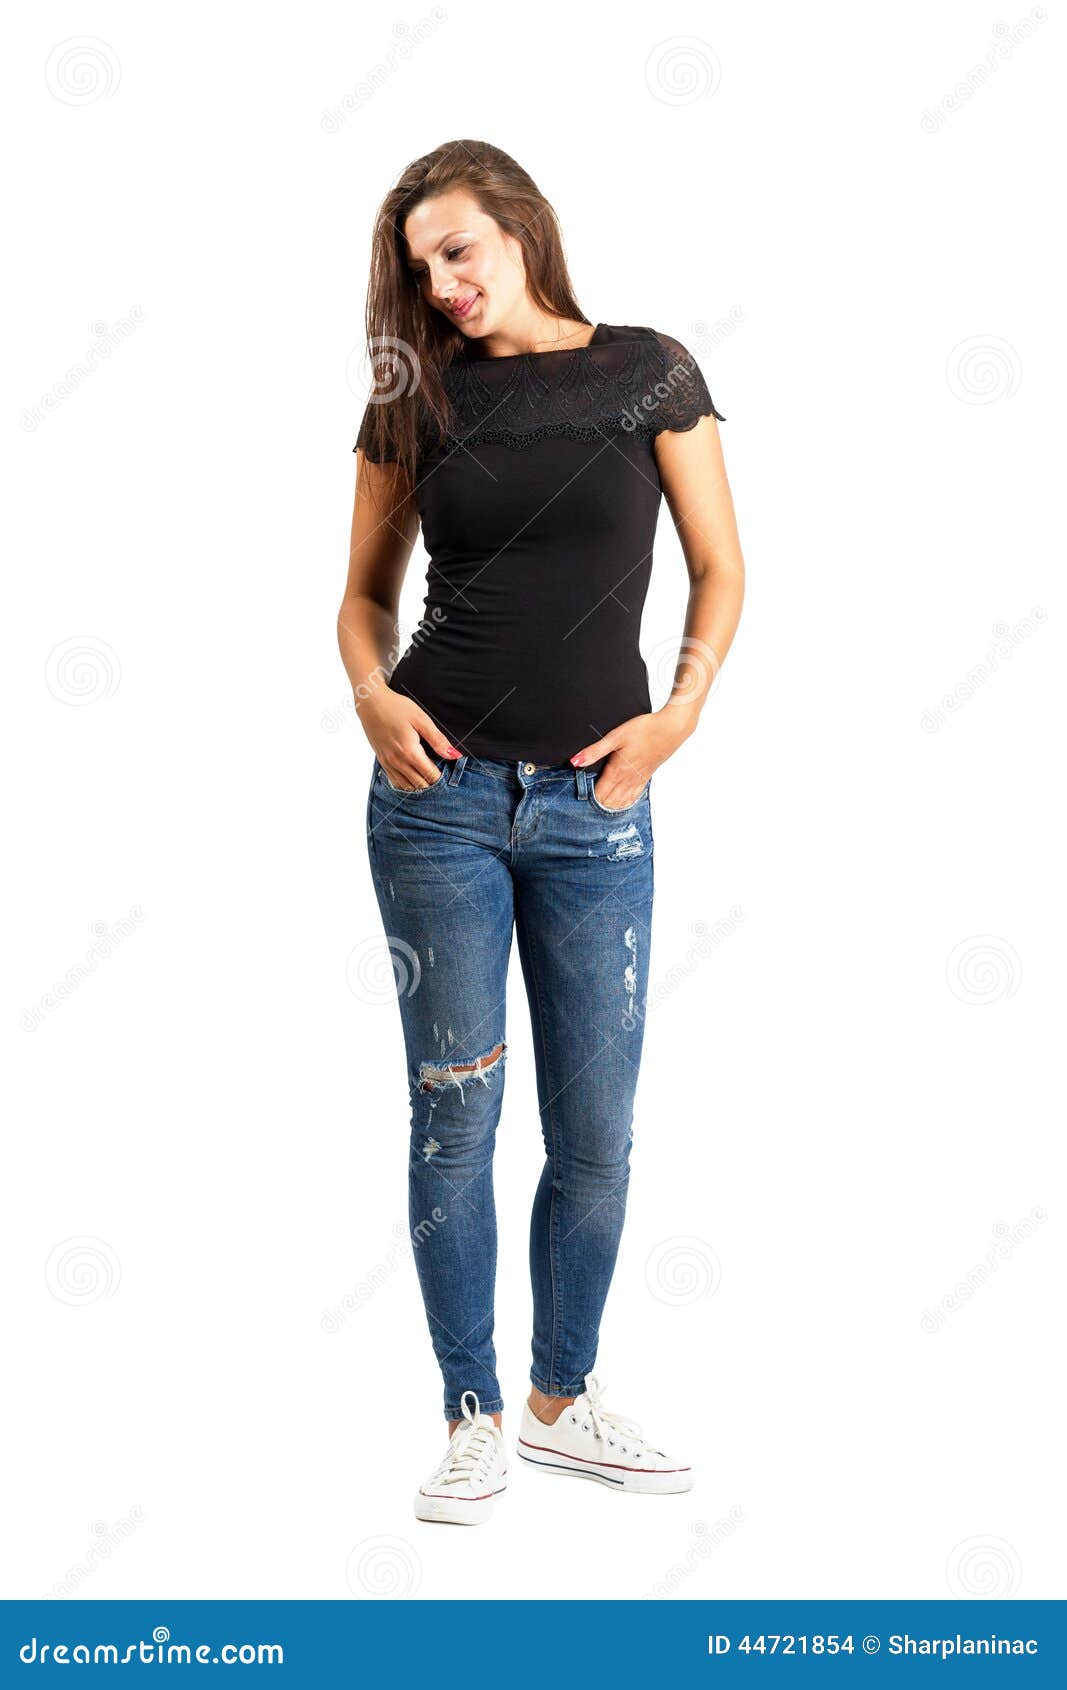 Posing Standing Beauty Looking Down Stock Photo - Image of casual ...